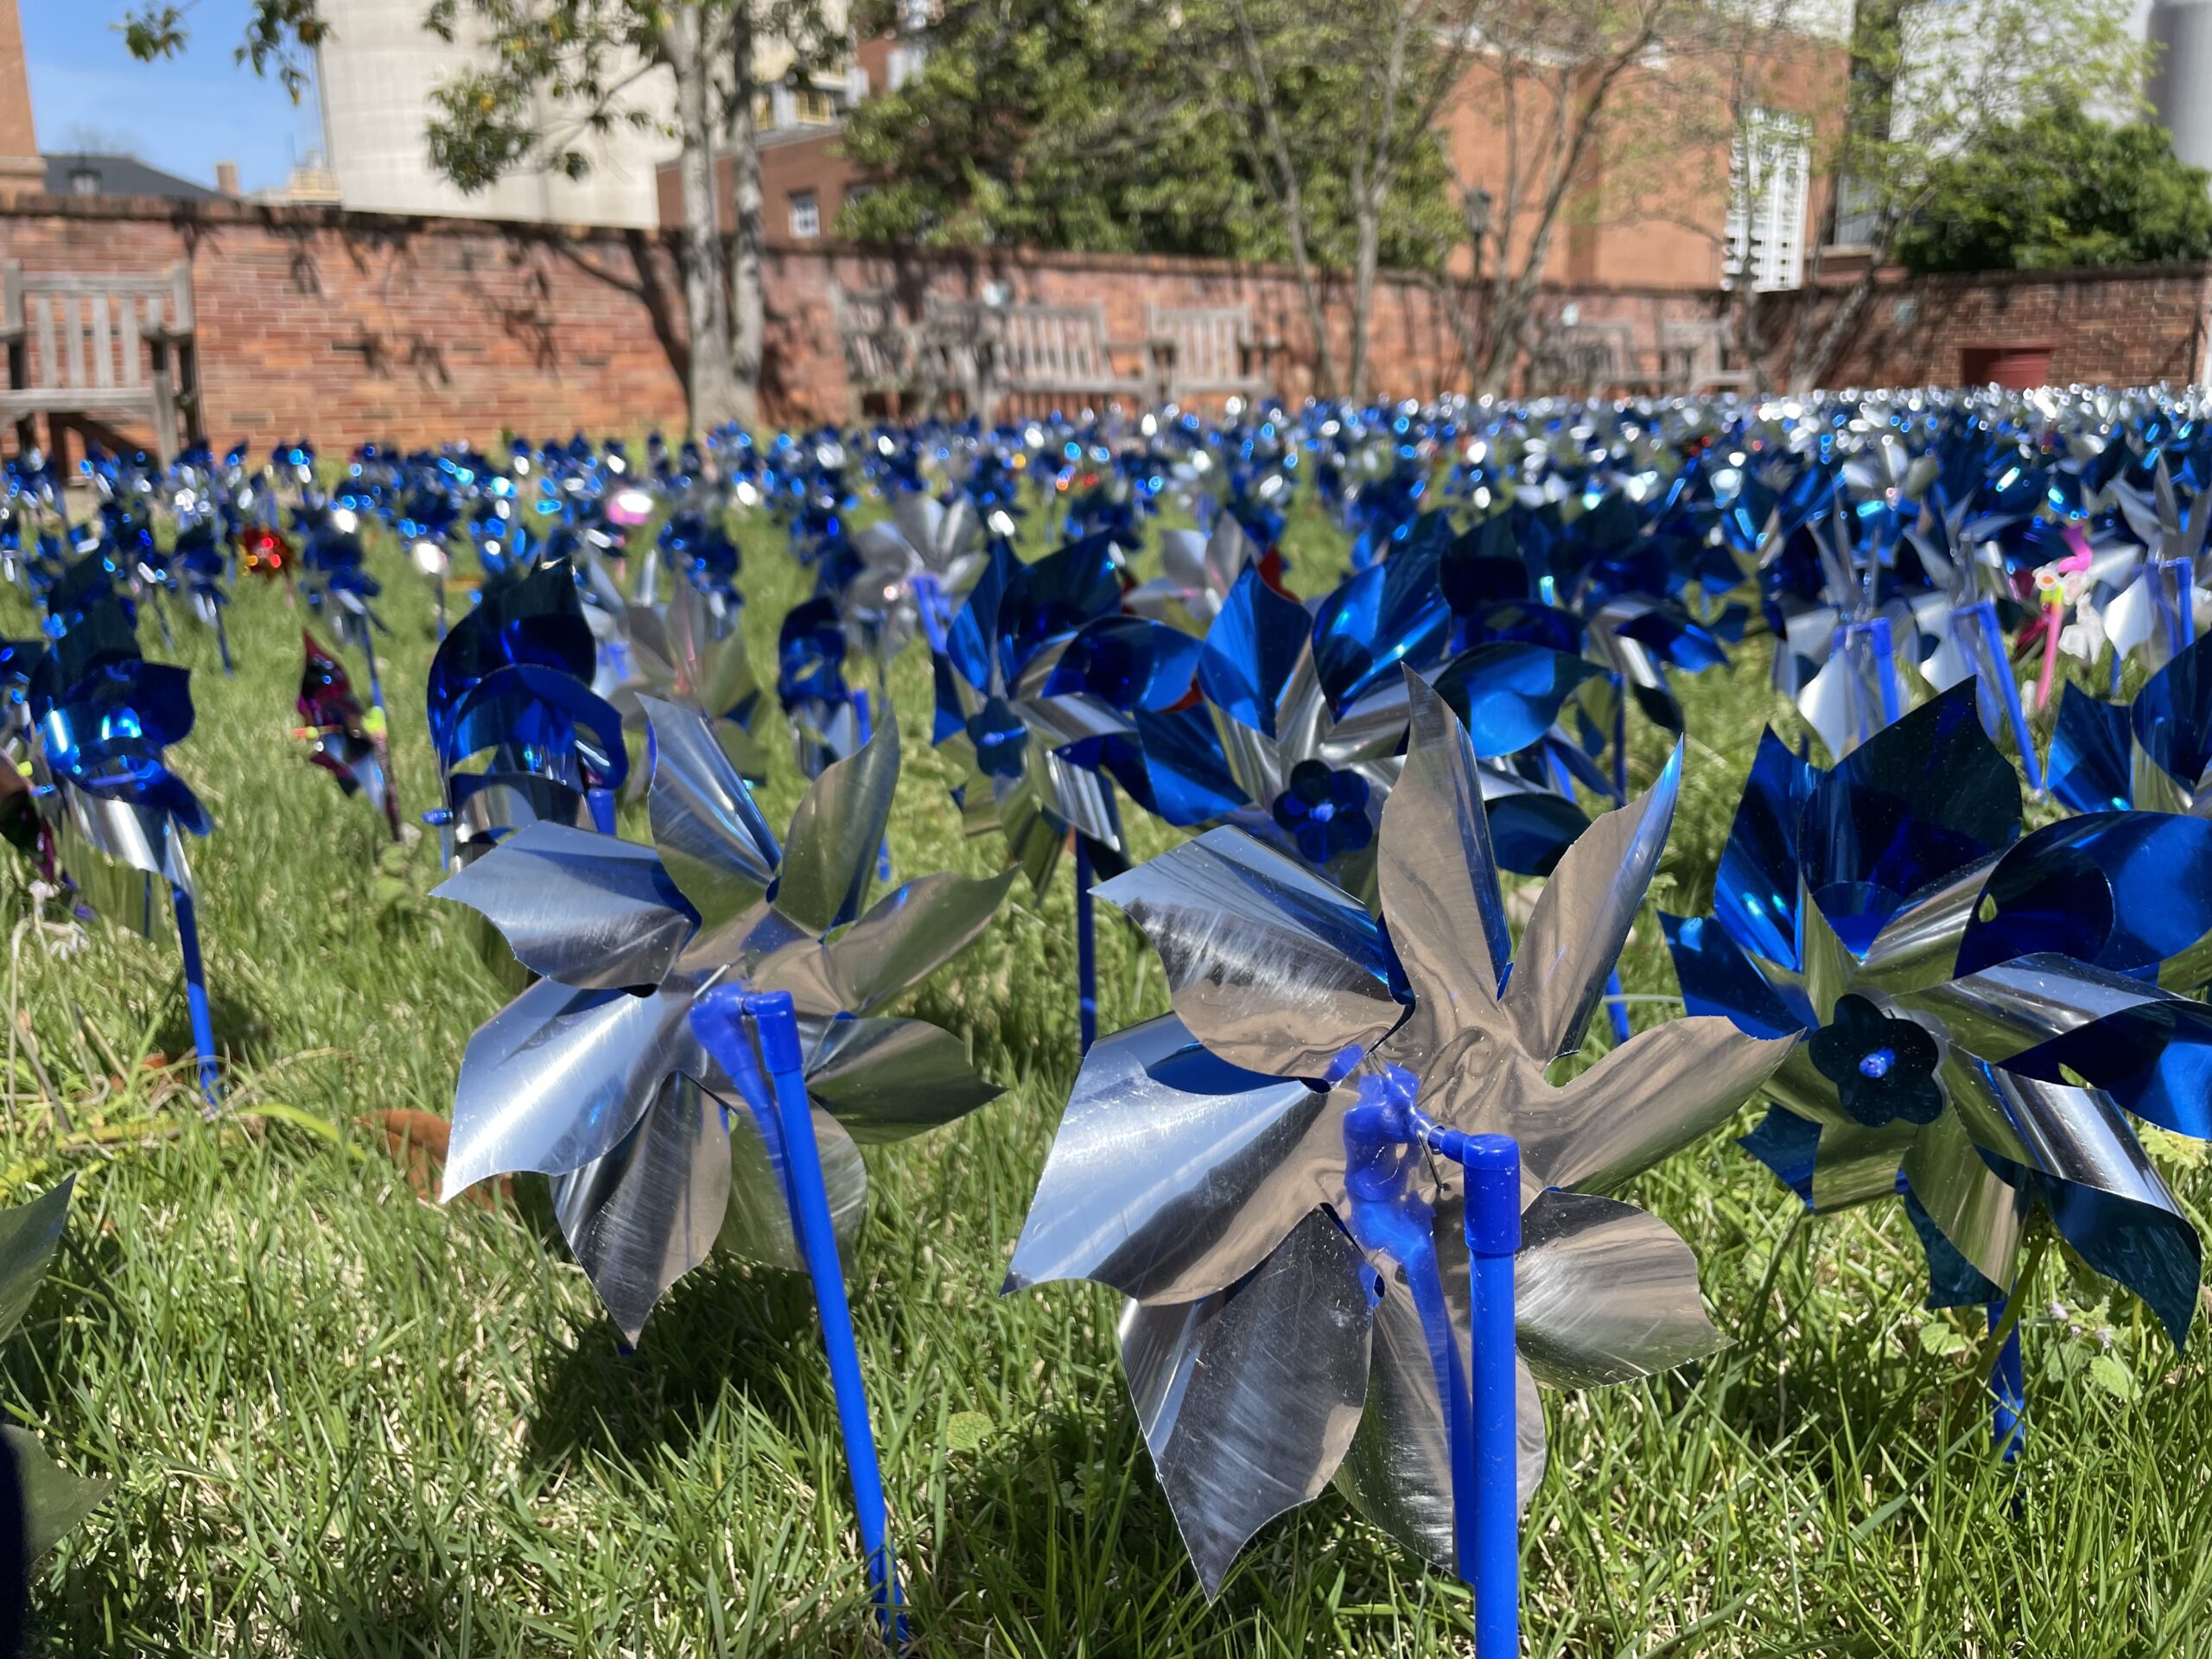 UVA Health Transplant Center Celebrates Donate Life Month with Stunning Pinwheel Garden Honoring Organ Donors and Transplant Recipients